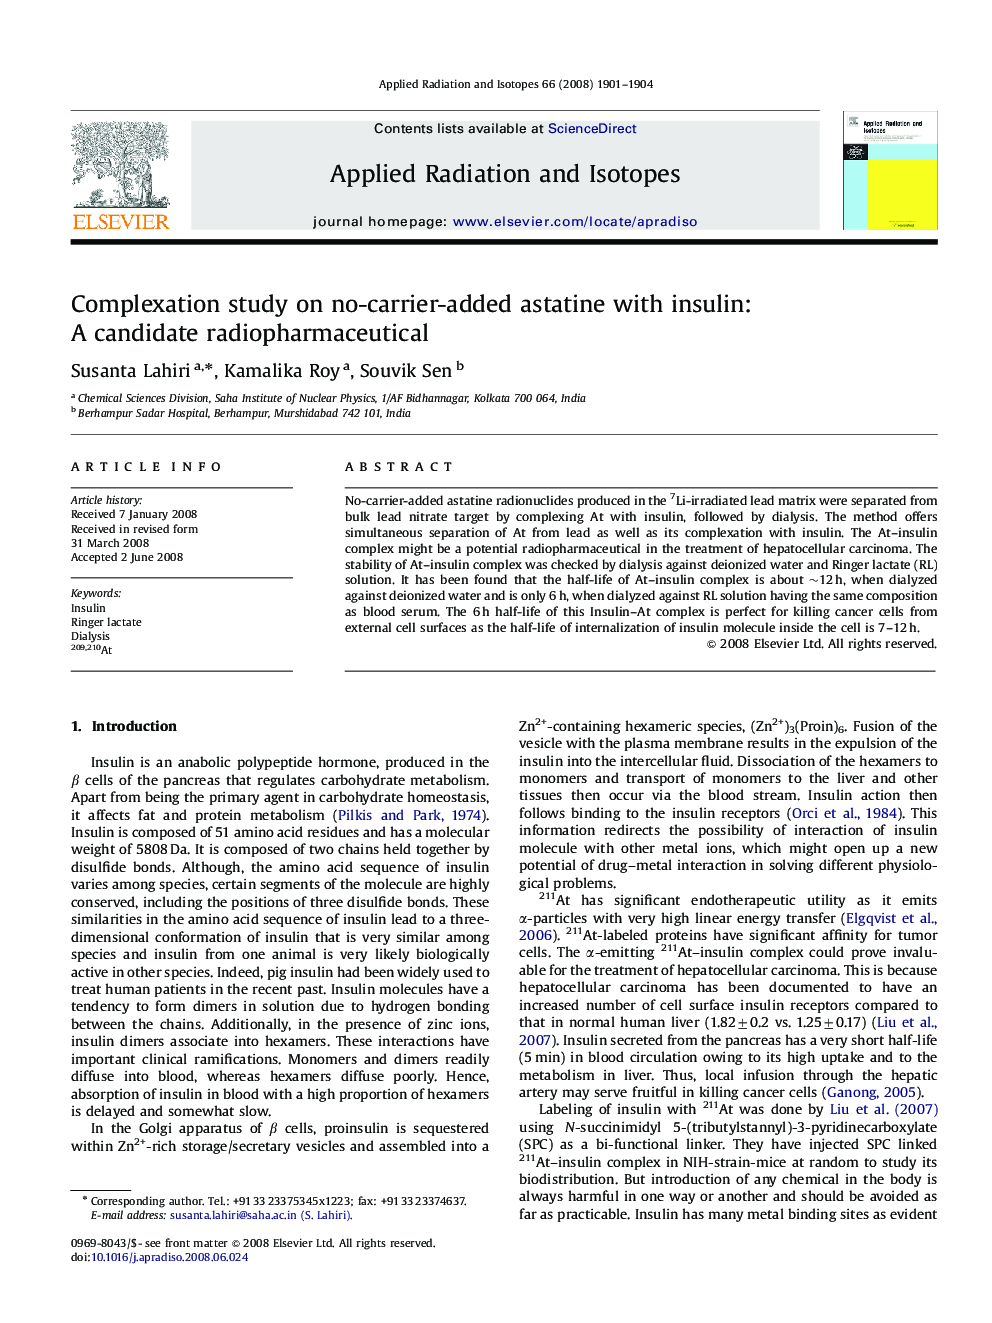 Complexation study on no-carrier-added astatine with insulin: A candidate radiopharmaceutical